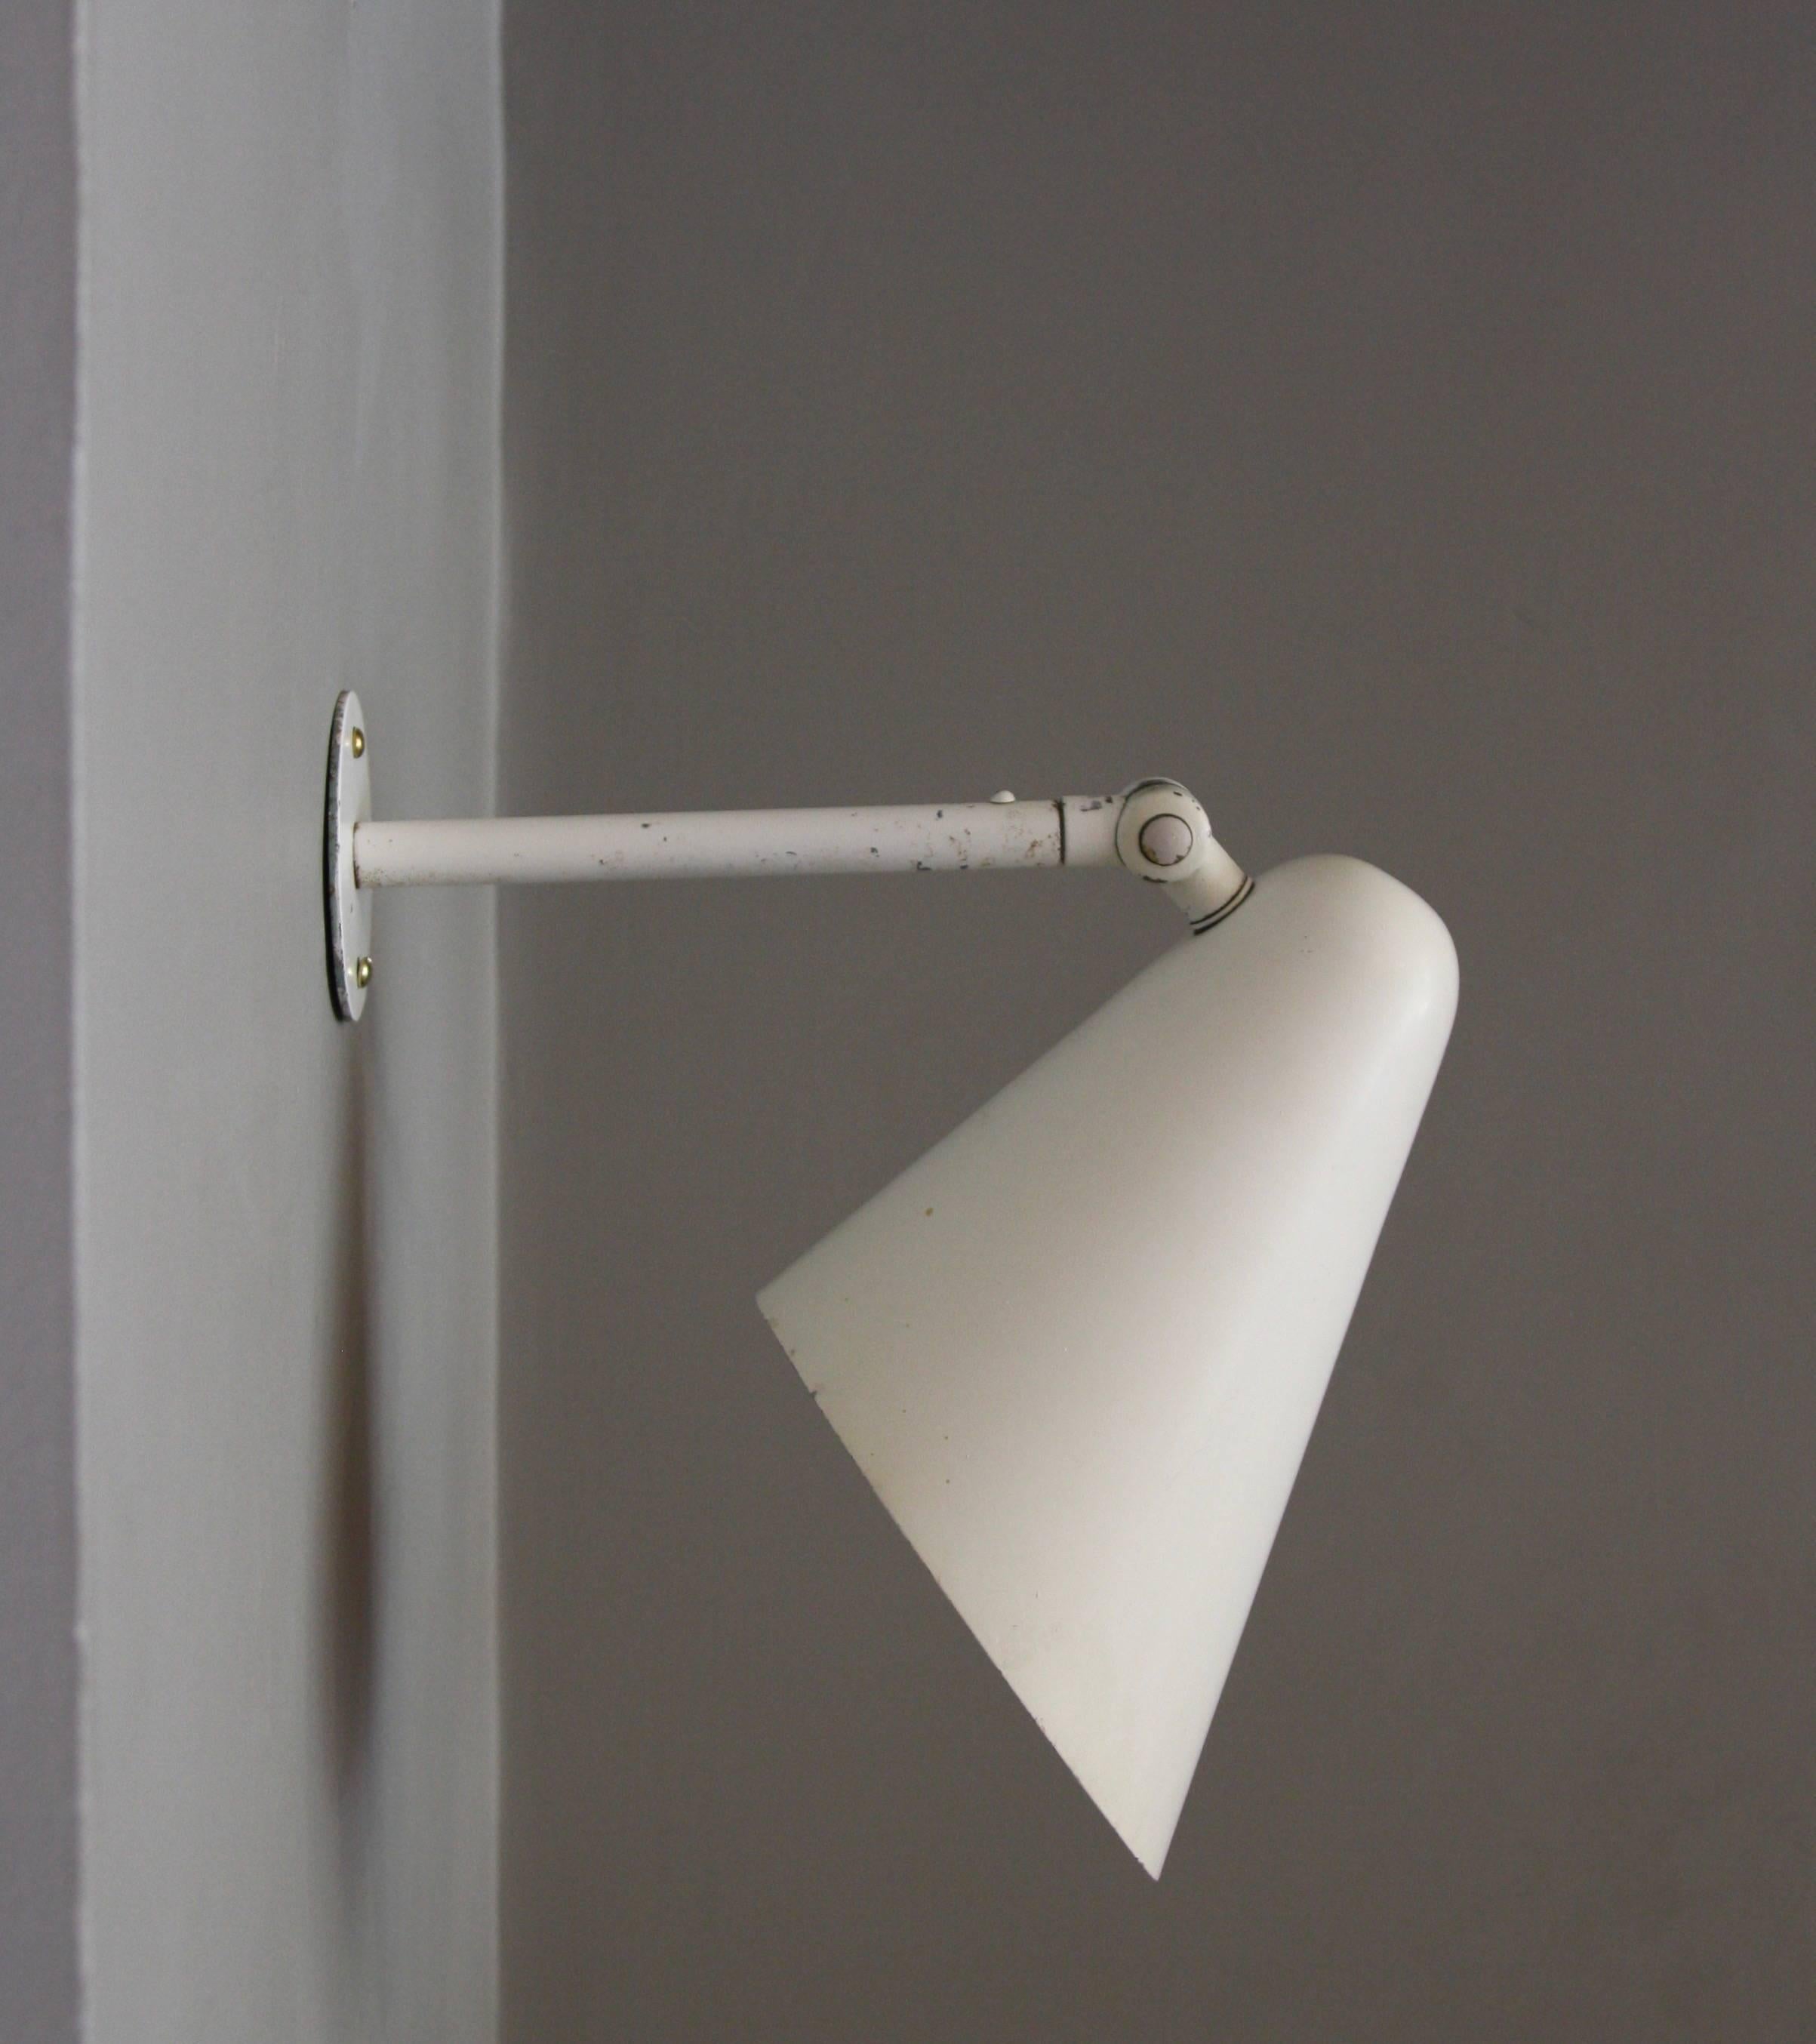 A single, medium sized, articulated wall light attributed to Vilhelm Lauritzen circa late 1930s and made by Louis Poulsen.
The lamp's hinge mechanism allows the shade of the light to be easily adjusted.
Newly wired but retaining the original white